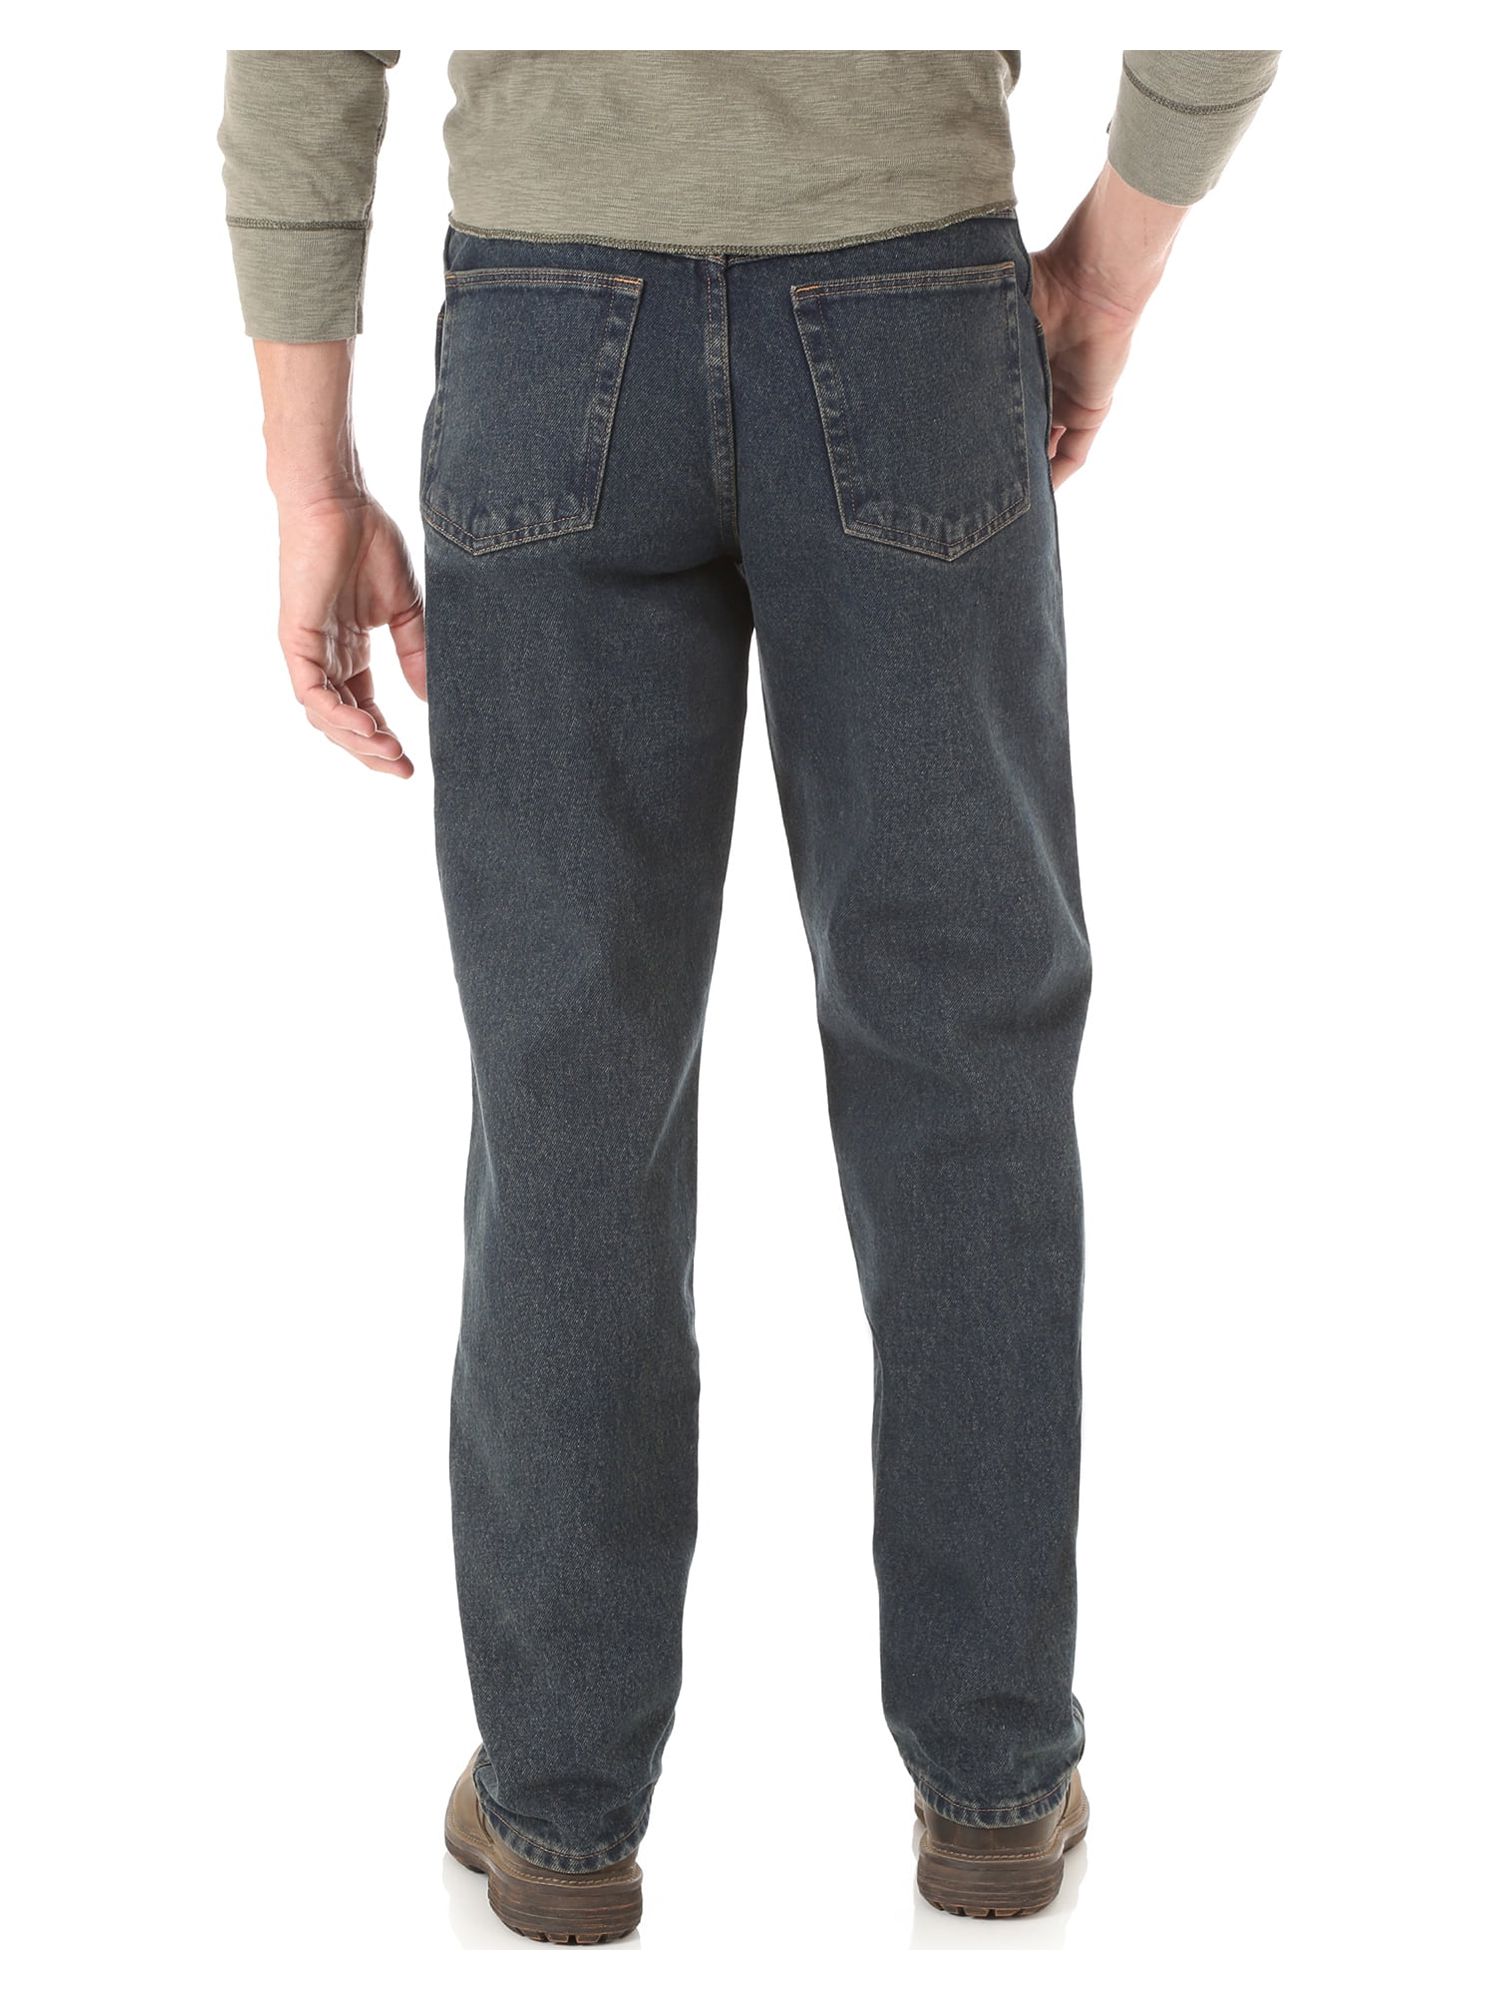 Wrangler Rustler Men's and Big Men's Relaxed Fit Jeans - image 3 of 4